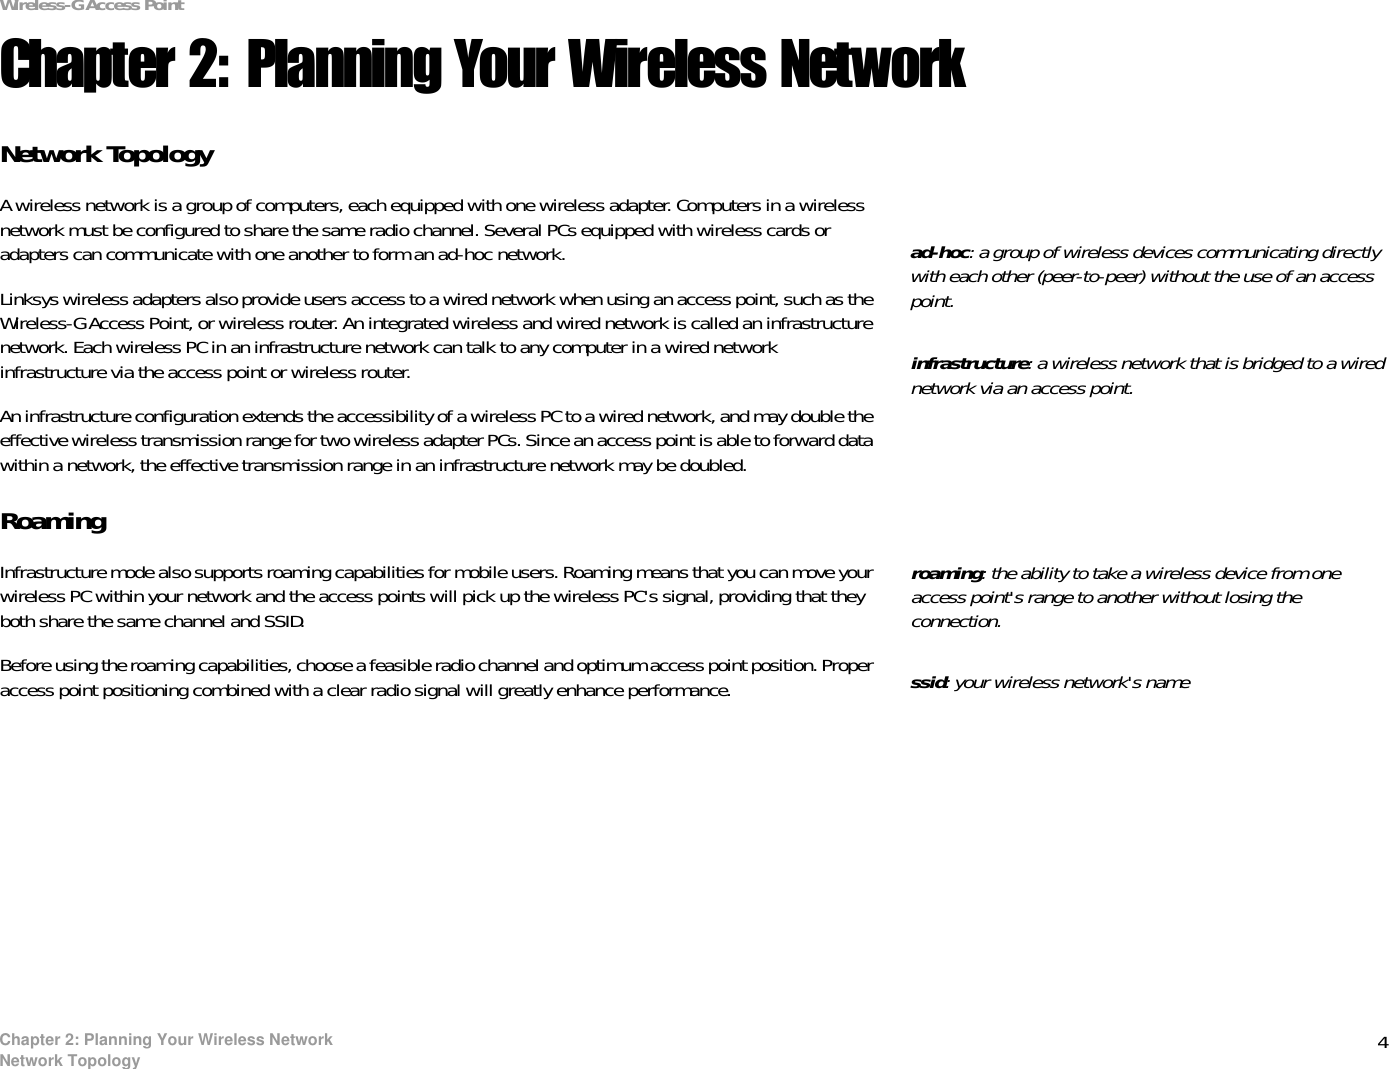 4Chapter 2: Planning Your Wireless NetworkNetwork TopologyWireless-G Access PointChapter 2: Planning Your Wireless NetworkNetwork TopologyA wireless network is a group of computers, each equipped with one wireless adapter. Computers in a wireless network must be configured to share the same radio channel. Several PCs equipped with wireless cards or adapters can communicate with one another to form an ad-hoc network.Linksys wireless adapters also provide users access to a wired network when using an access point, such as the Wireless-G Access Point, or wireless router. An integrated wireless and wired network is called an infrastructure network. Each wireless PC in an infrastructure network can talk to any computer in a wired network infrastructure via the access point or wireless router.An infrastructure configuration extends the accessibility of a wireless PC to a wired network, and may double the effective wireless transmission range for two wireless adapter PCs. Since an access point is able to forward data within a network, the effective transmission range in an infrastructure network may be doubled.RoamingInfrastructure mode also supports roaming capabilities for mobile users. Roaming means that you can move your wireless PC within your network and the access points will pick up the wireless PC&apos;s signal, providing that they both share the same channel and SSID.Before using the roaming capabilities, choose a feasible radio channel and optimum access point position. Proper access point positioning combined with a clear radio signal will greatly enhance performance.infrastructure: a wireless network that is bridged to a wired network via an access point.ad-hoc: a group of wireless devices communicating directly with each other (peer-to-peer) without the use of an access point.roaming: the ability to take a wireless device from one access point&apos;s range to another without losing the connection.ssid: your wireless network&apos;s name